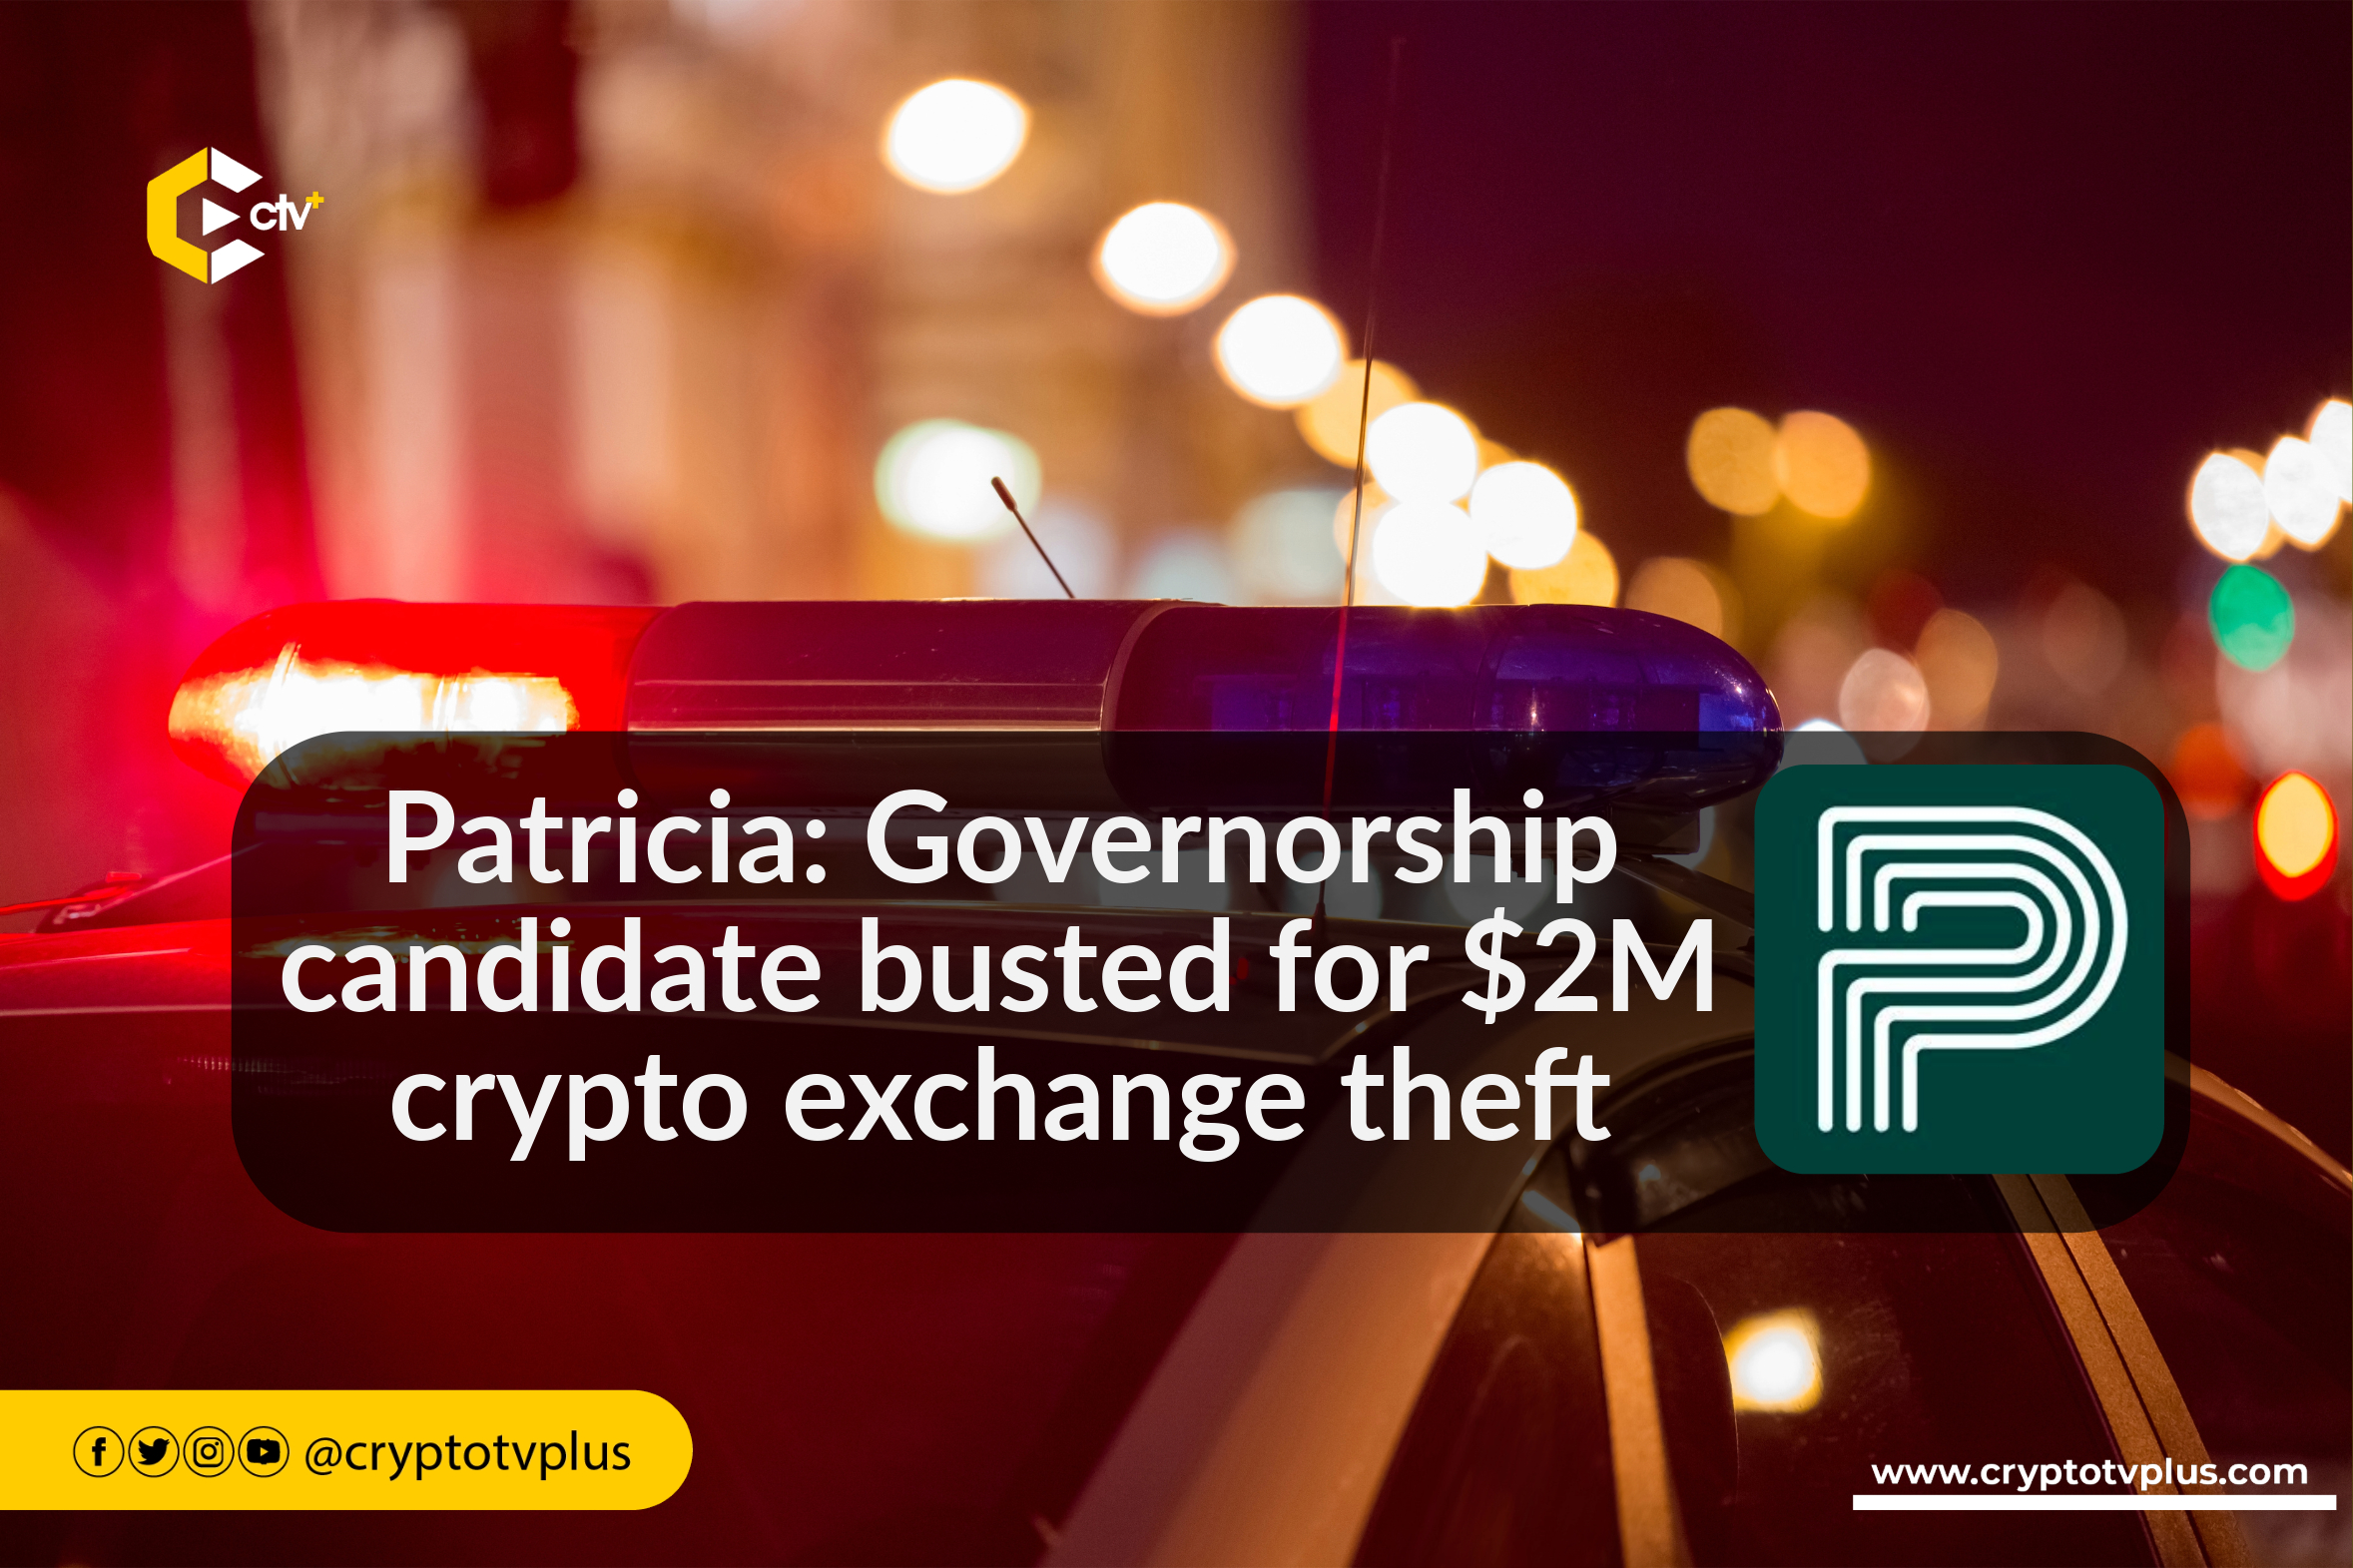 Nigerian Police arrest politician over $2M Patricia exchange crypto theft